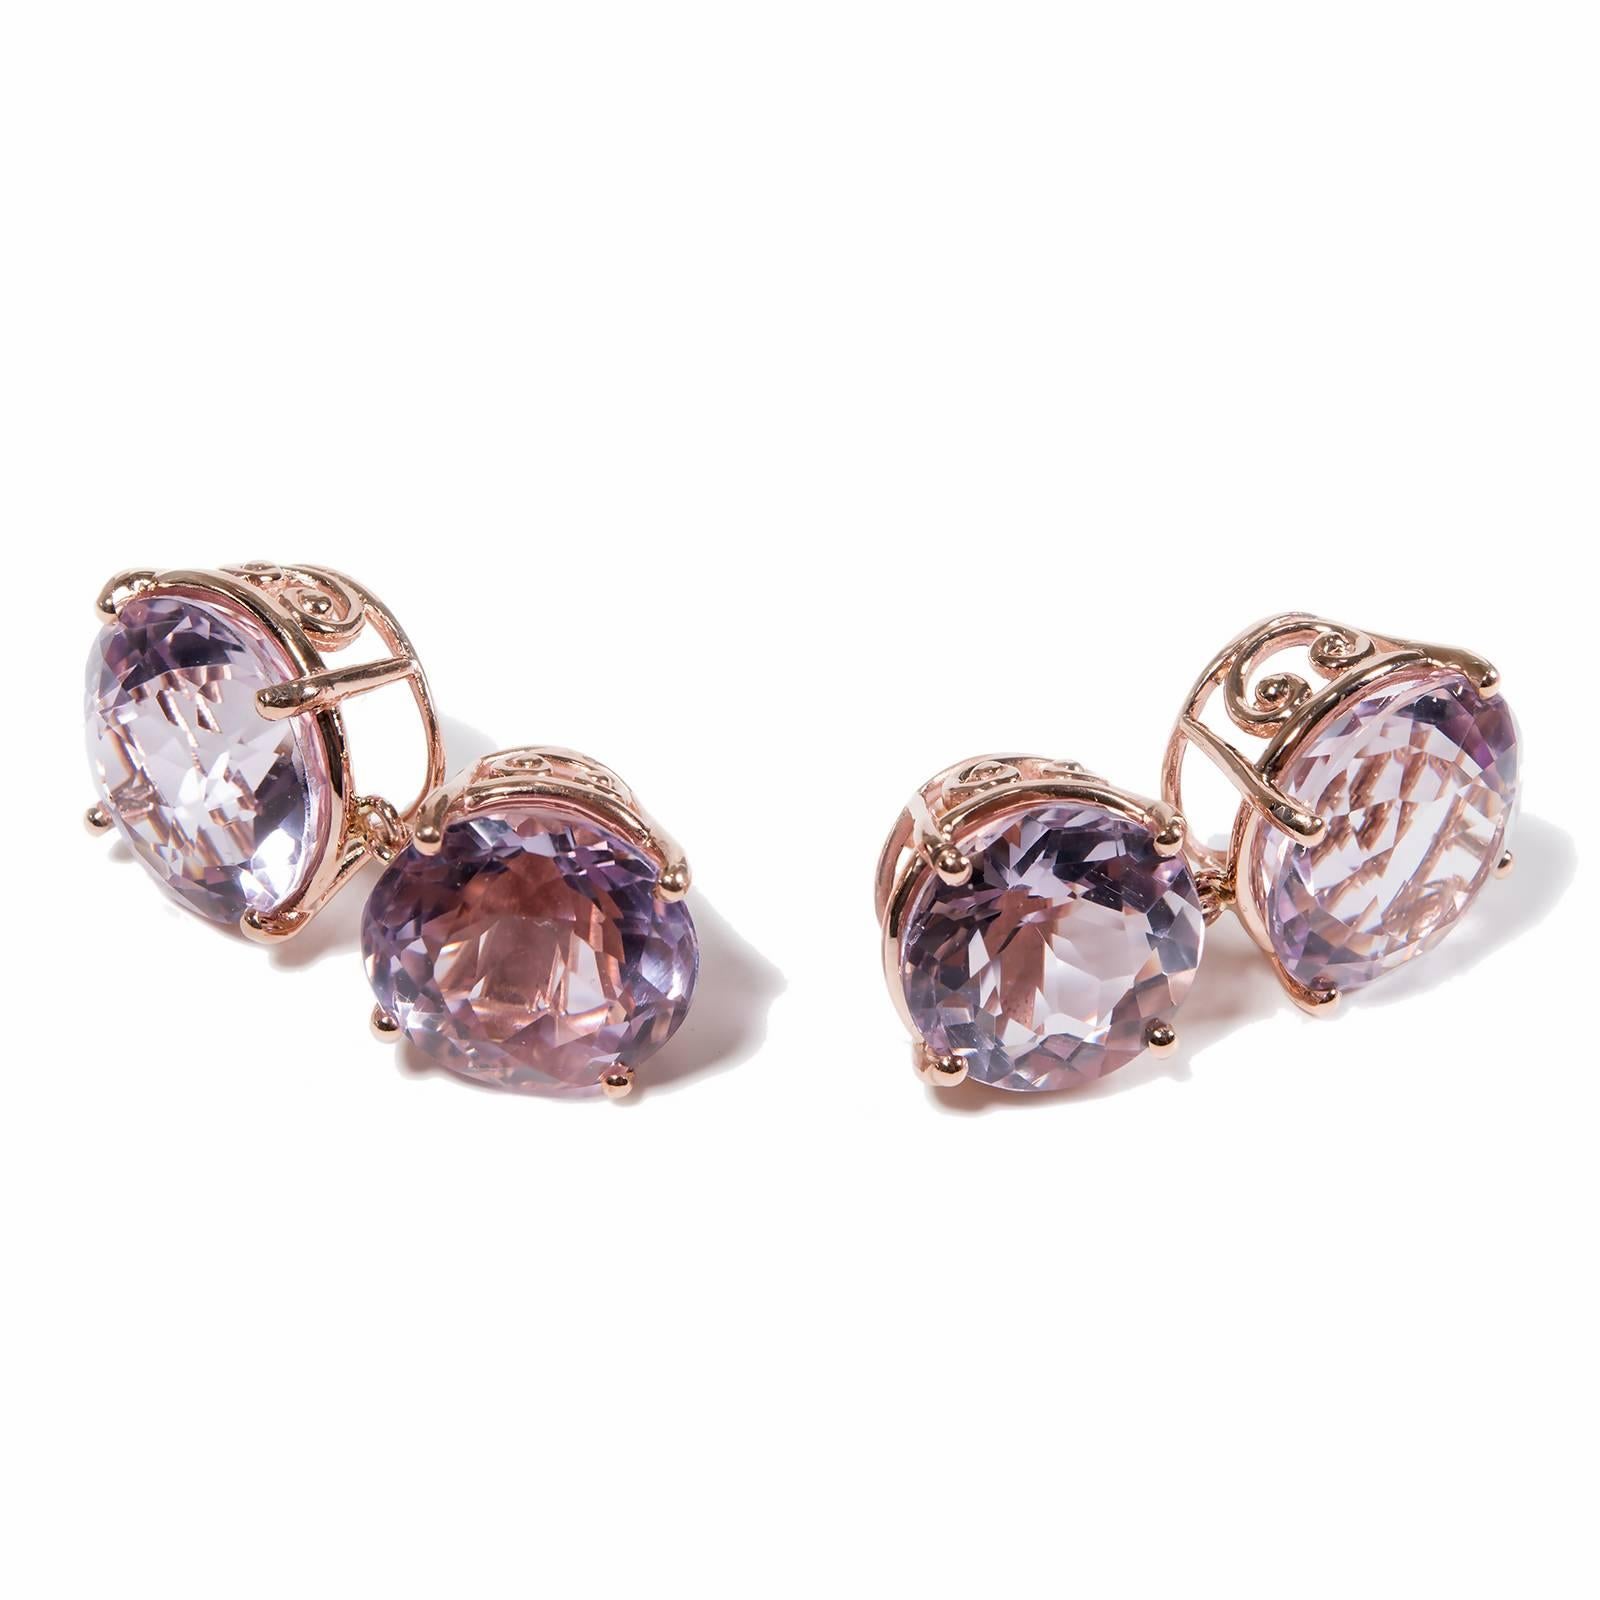 Lilac purple untreated Amethyst Riviere Earrings. The stones are natural and slightly different shape and depth. Rose gold settings were made for each stone in the original style of scroll basket. All Amethyst were re-polished. The jewelry is from